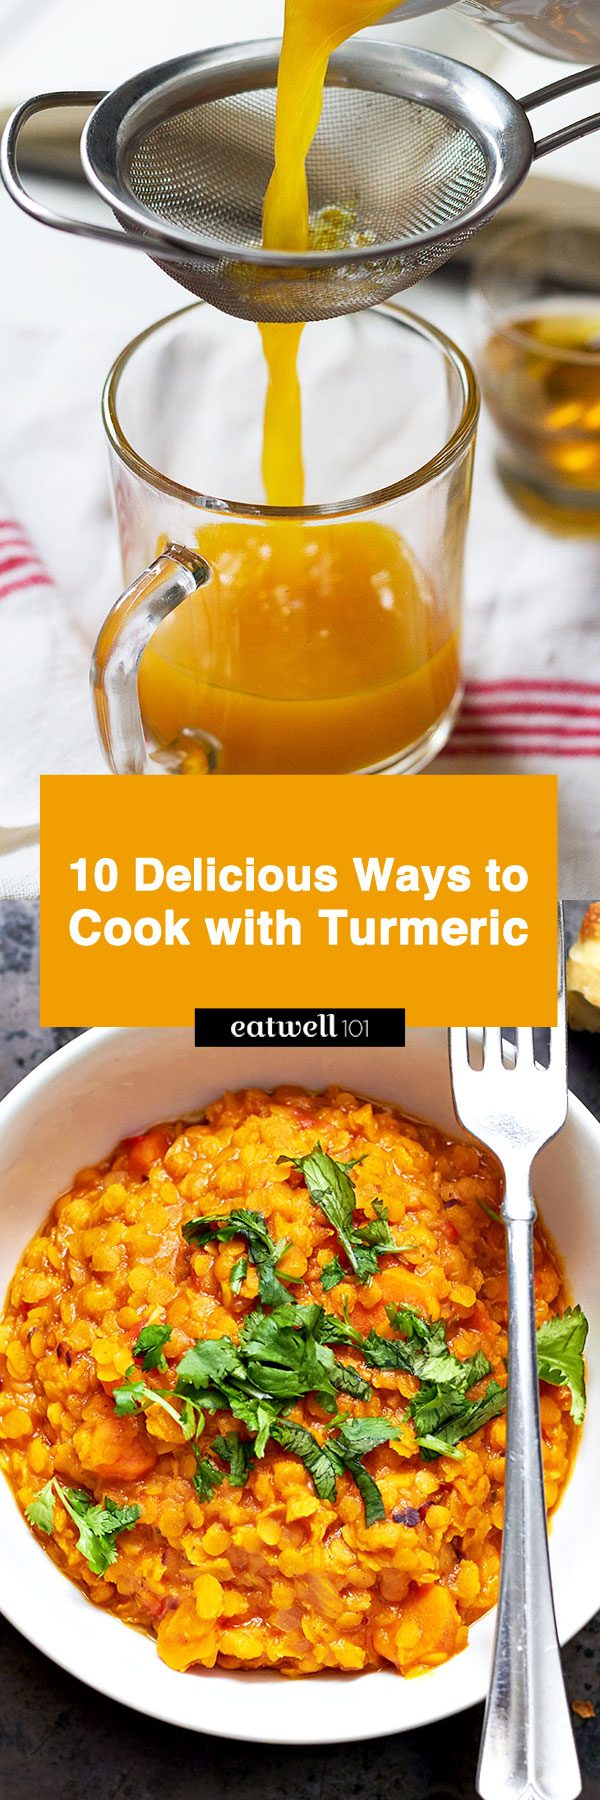 10 Turmeric Recipes Packed with Health Benefits - #turmeric #recipes #eatwell101 - Turmeric is so good for our health - Try these turmeric recipes and make the most of the versatile yellow spice! 